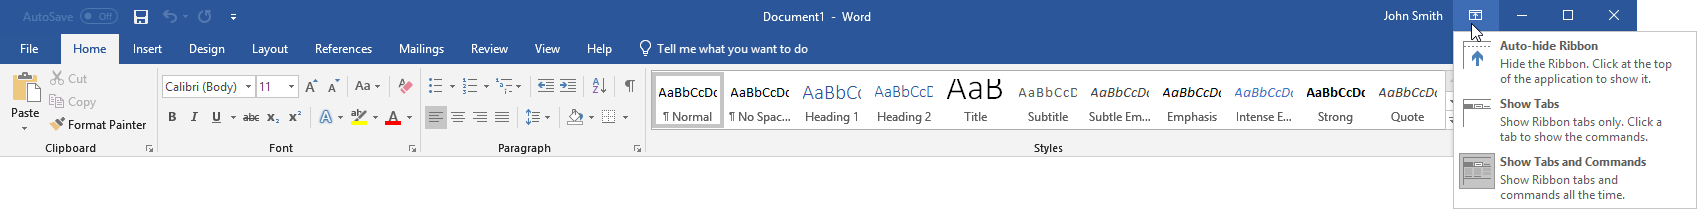 getting started with word 7